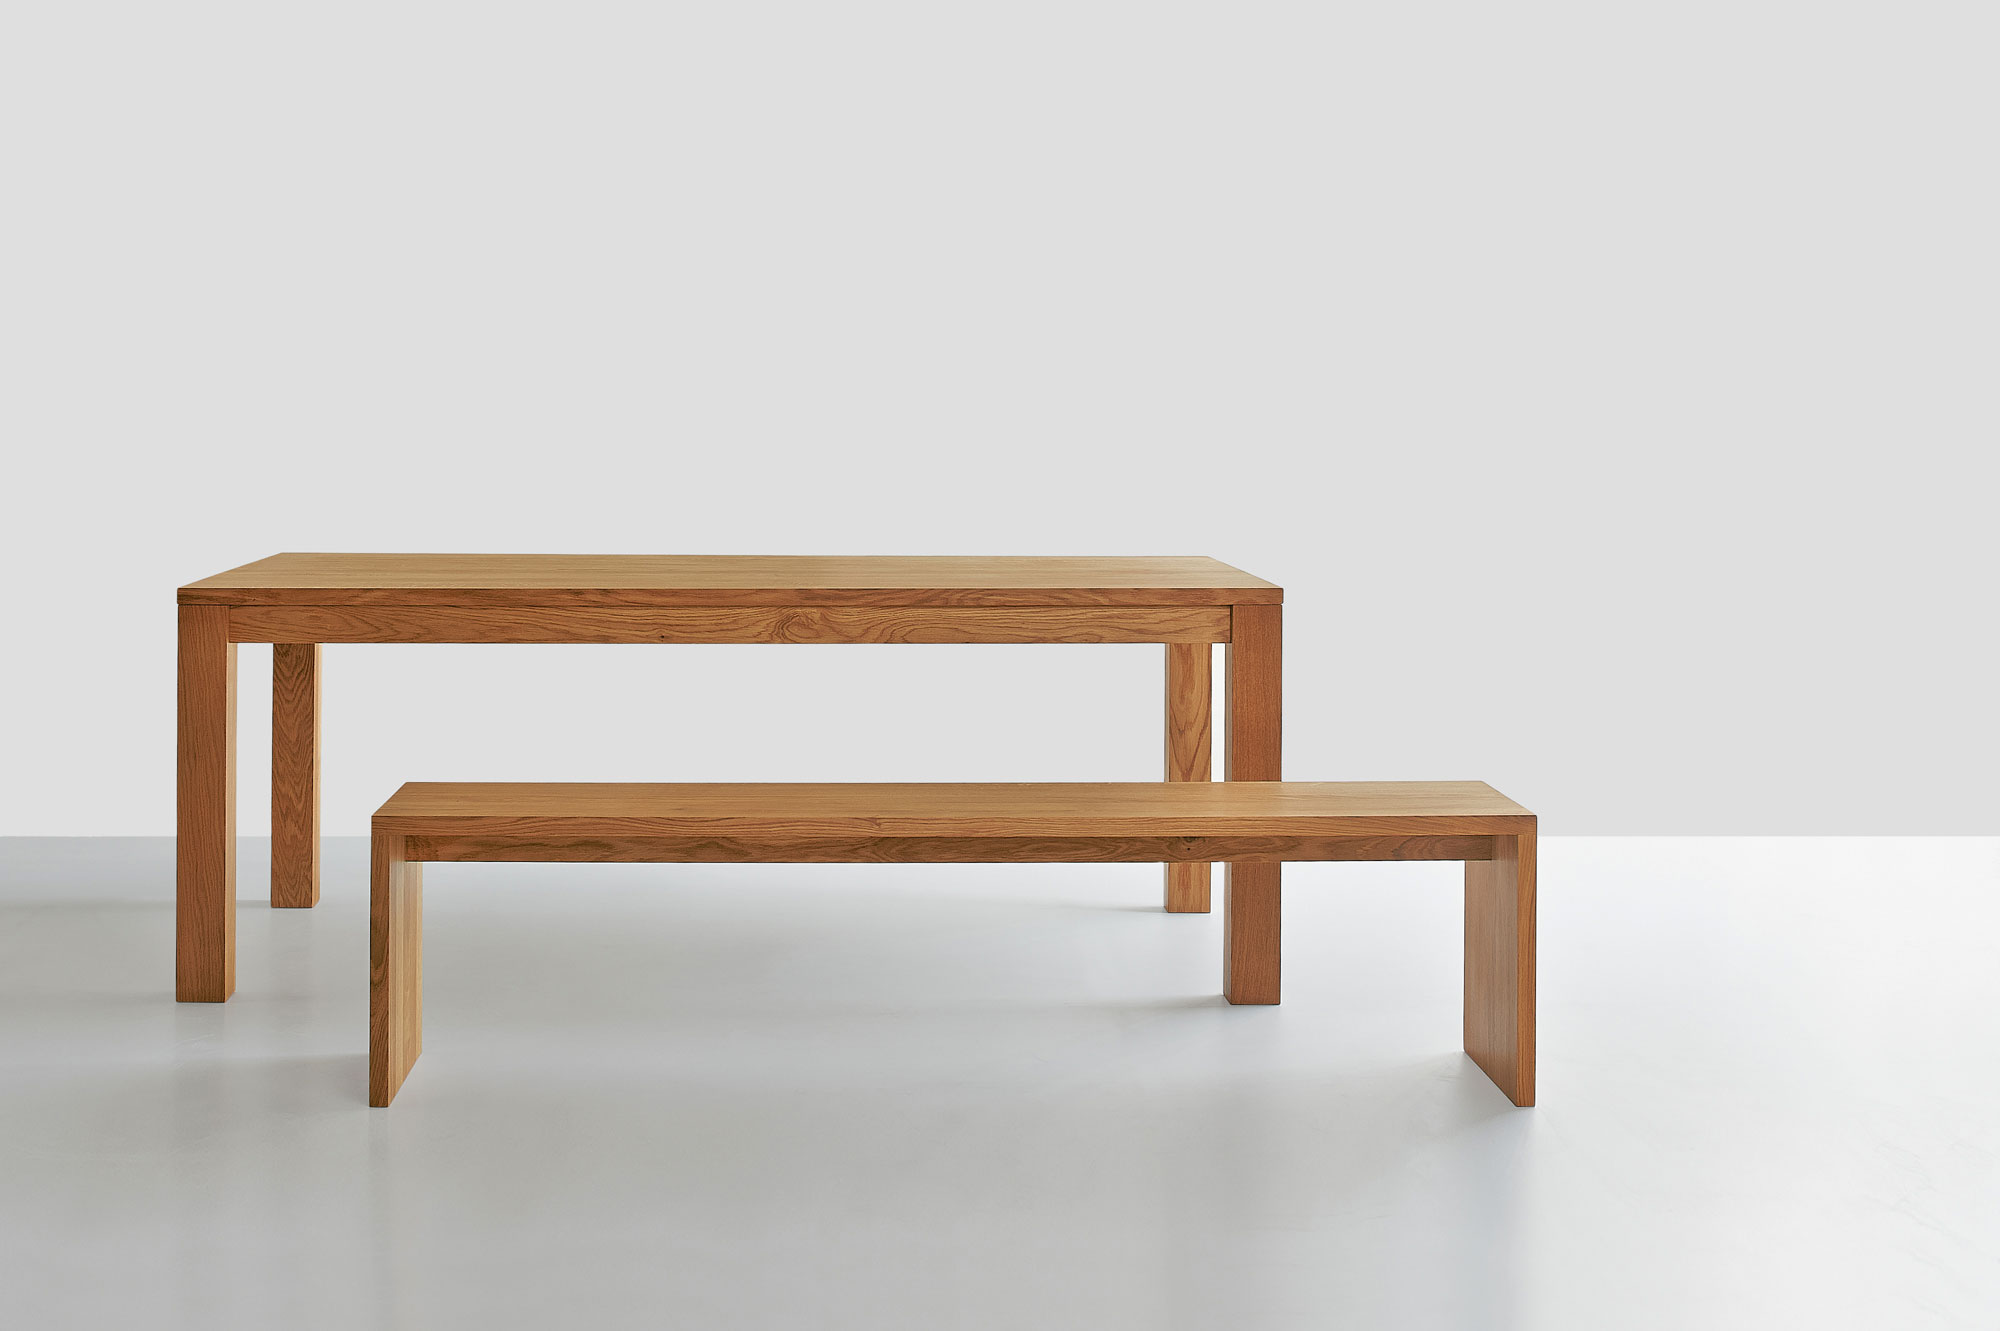 Solid Wood Bench MENA 3 1010 custom made in solid wood by vitamin design